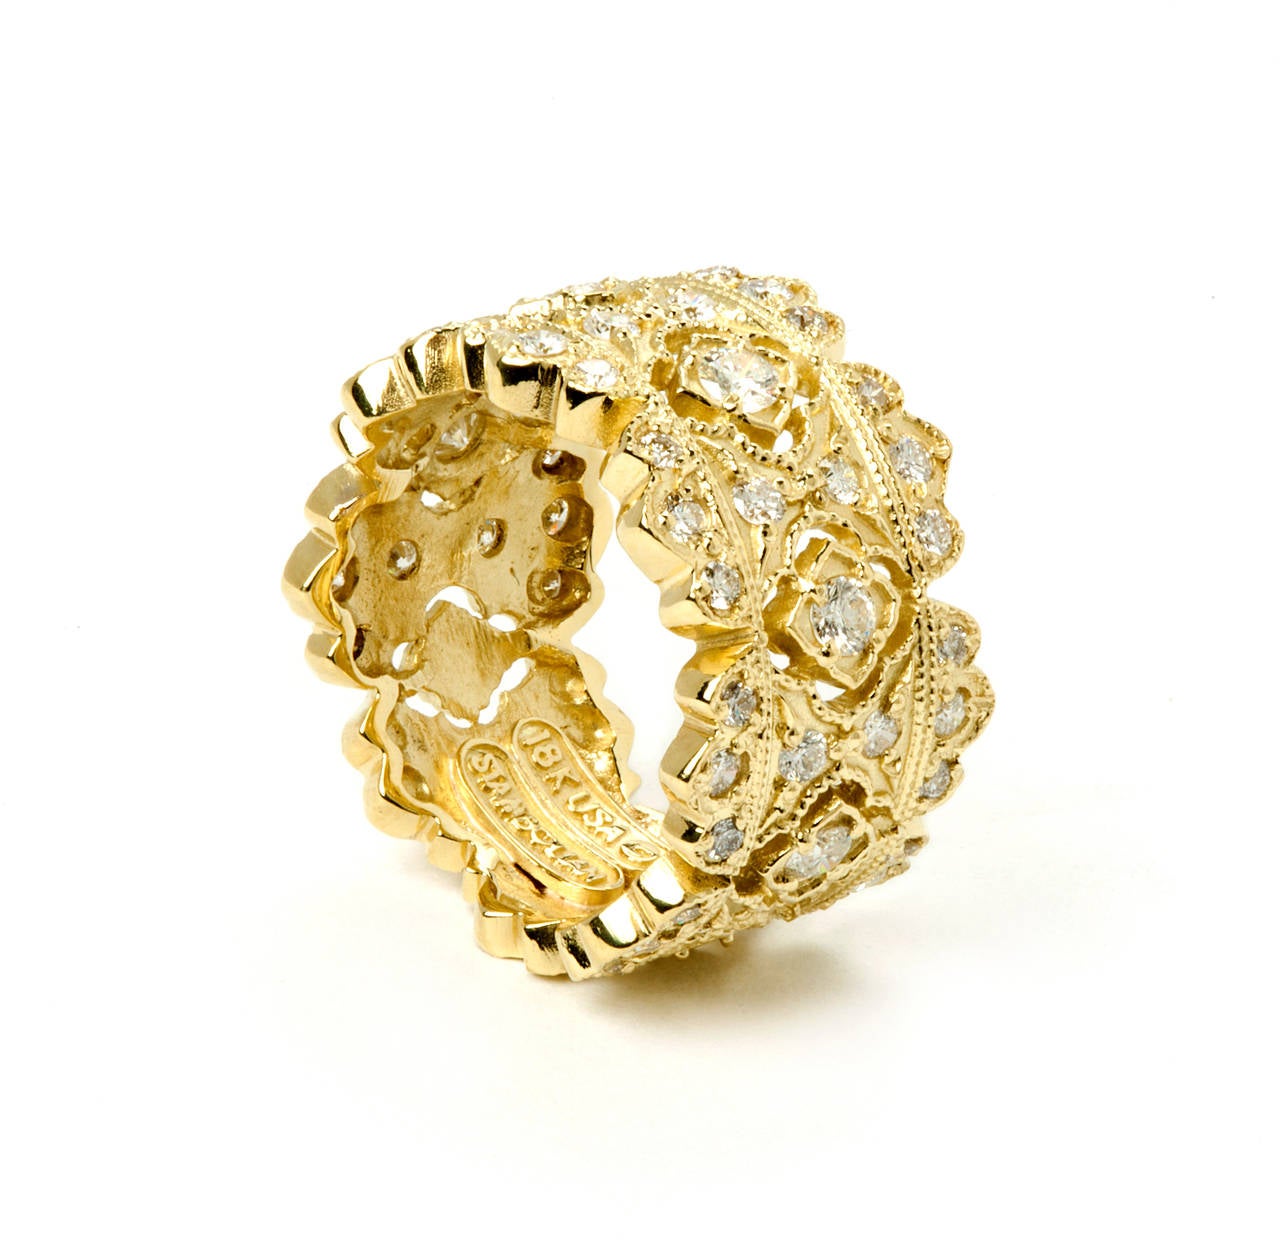 Stambolian 18 Karat Yellow Gold Diamond Wide Band Passion Collection Ring

This is the band ring from the 